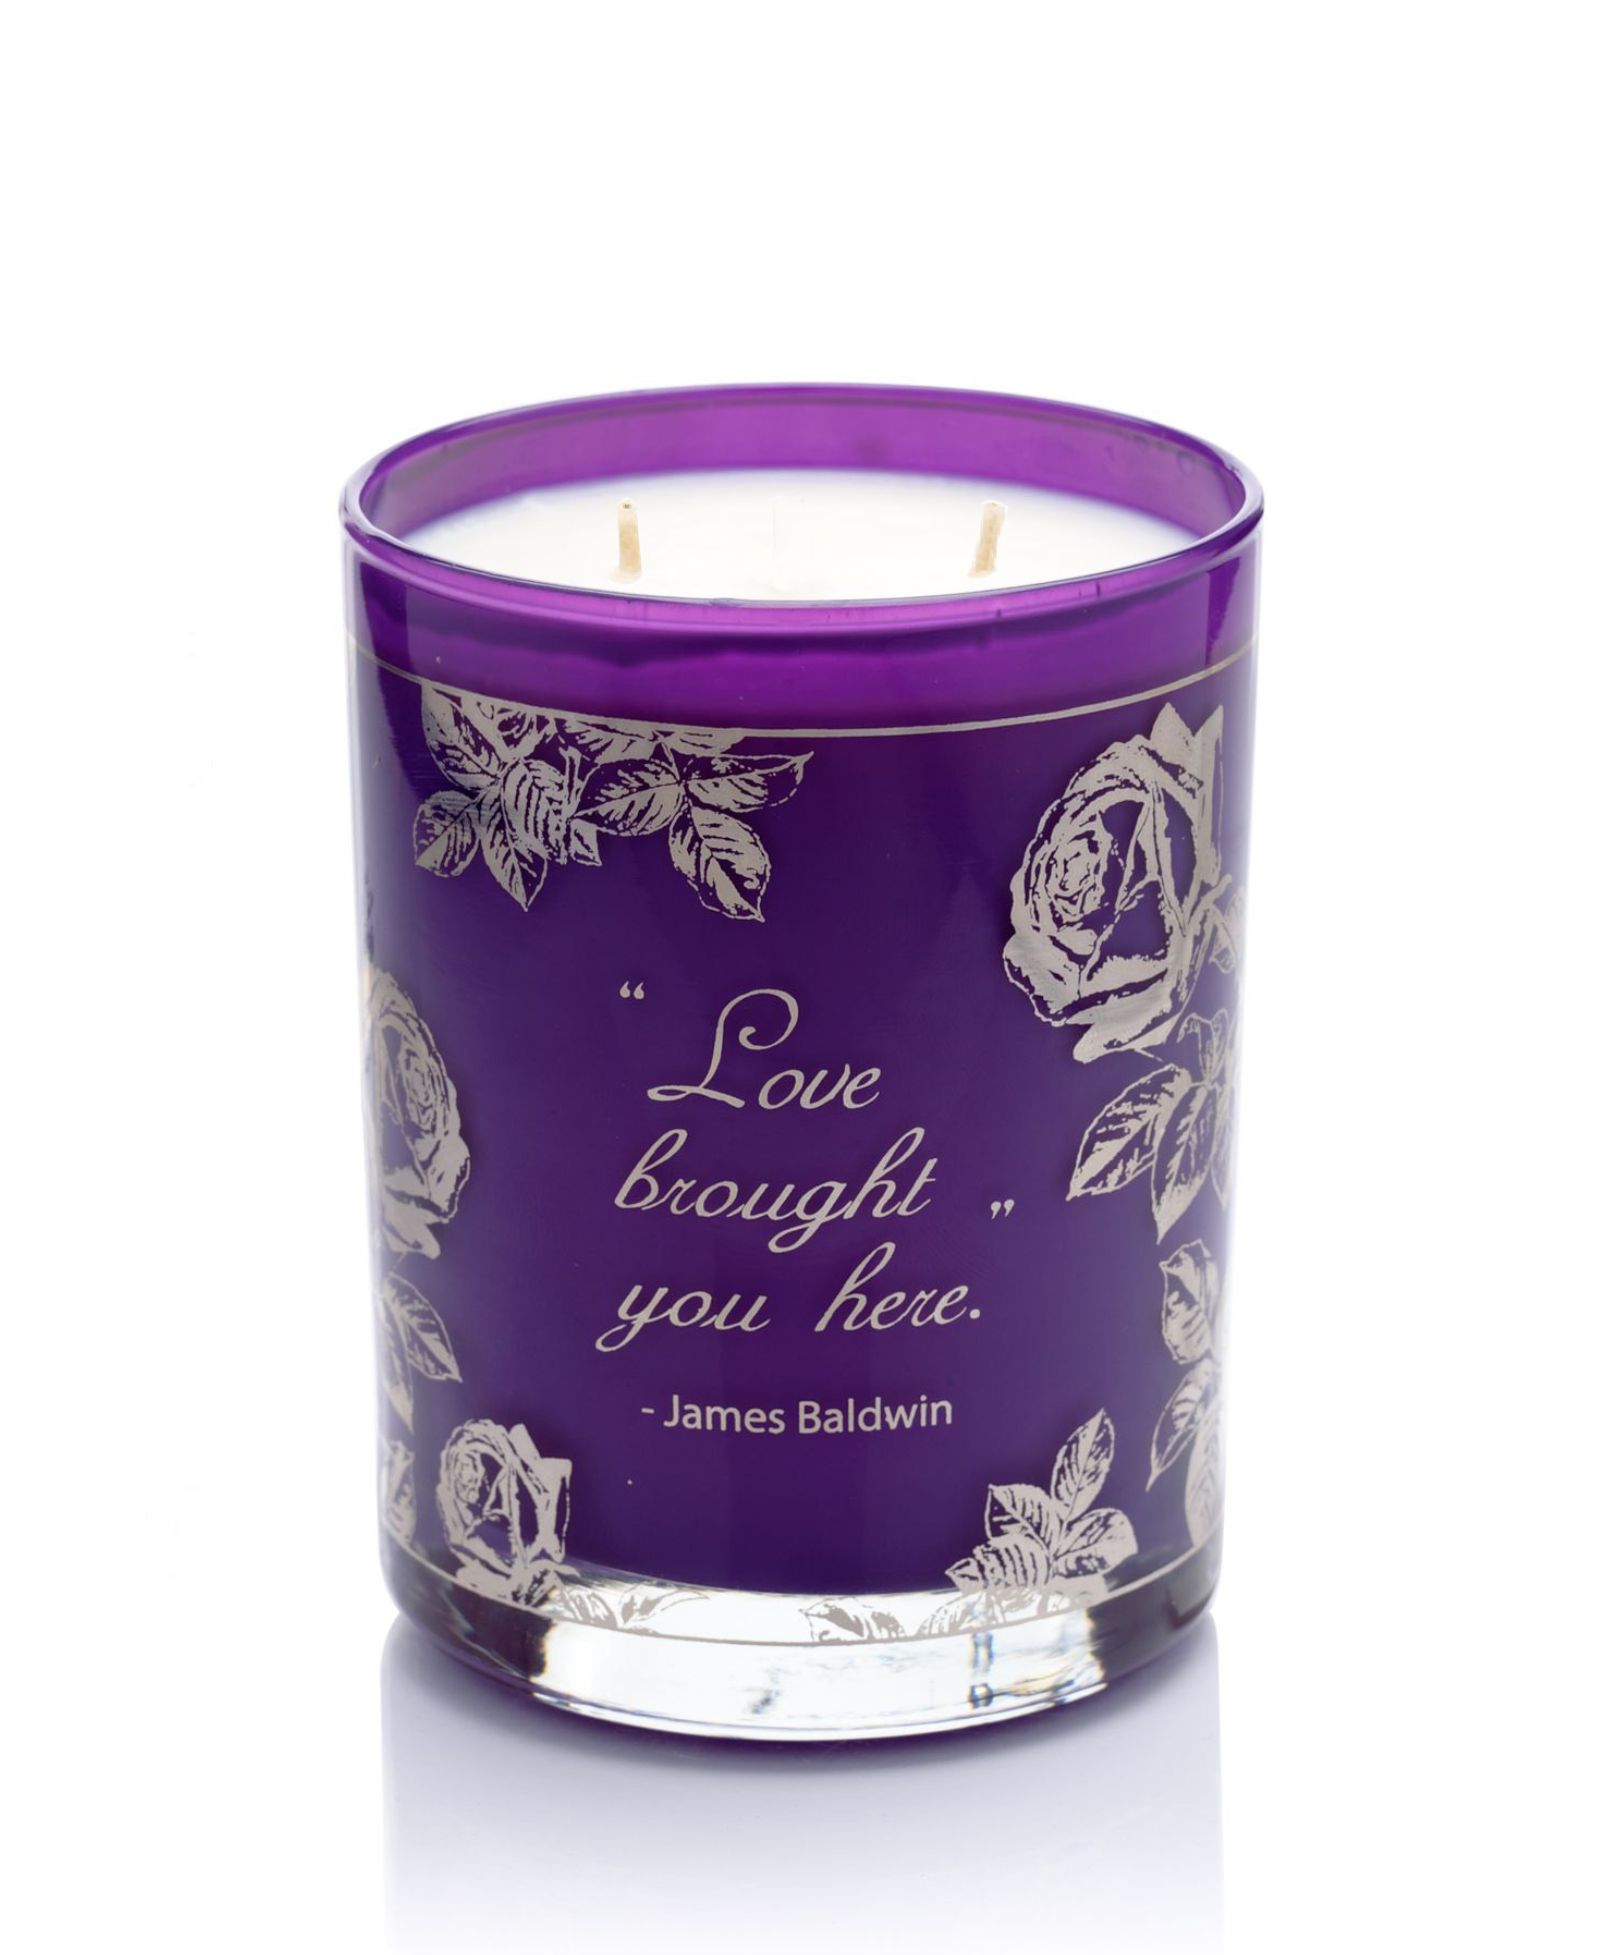 Limited edition purple and silver Love candle.  It says "Love Brought You Here" - James Baldwin